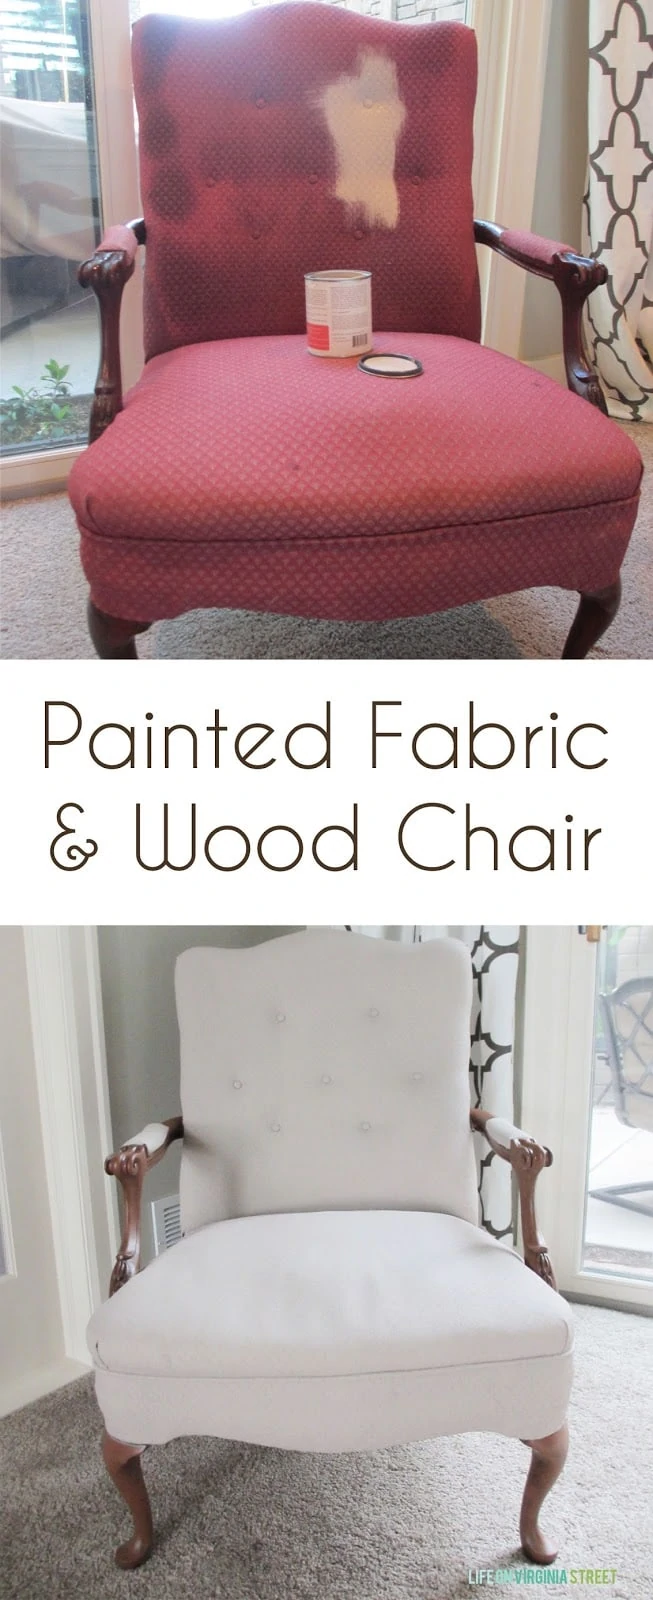 DIY Painted Fabric and Wood Chair - I can't believe this transformation!